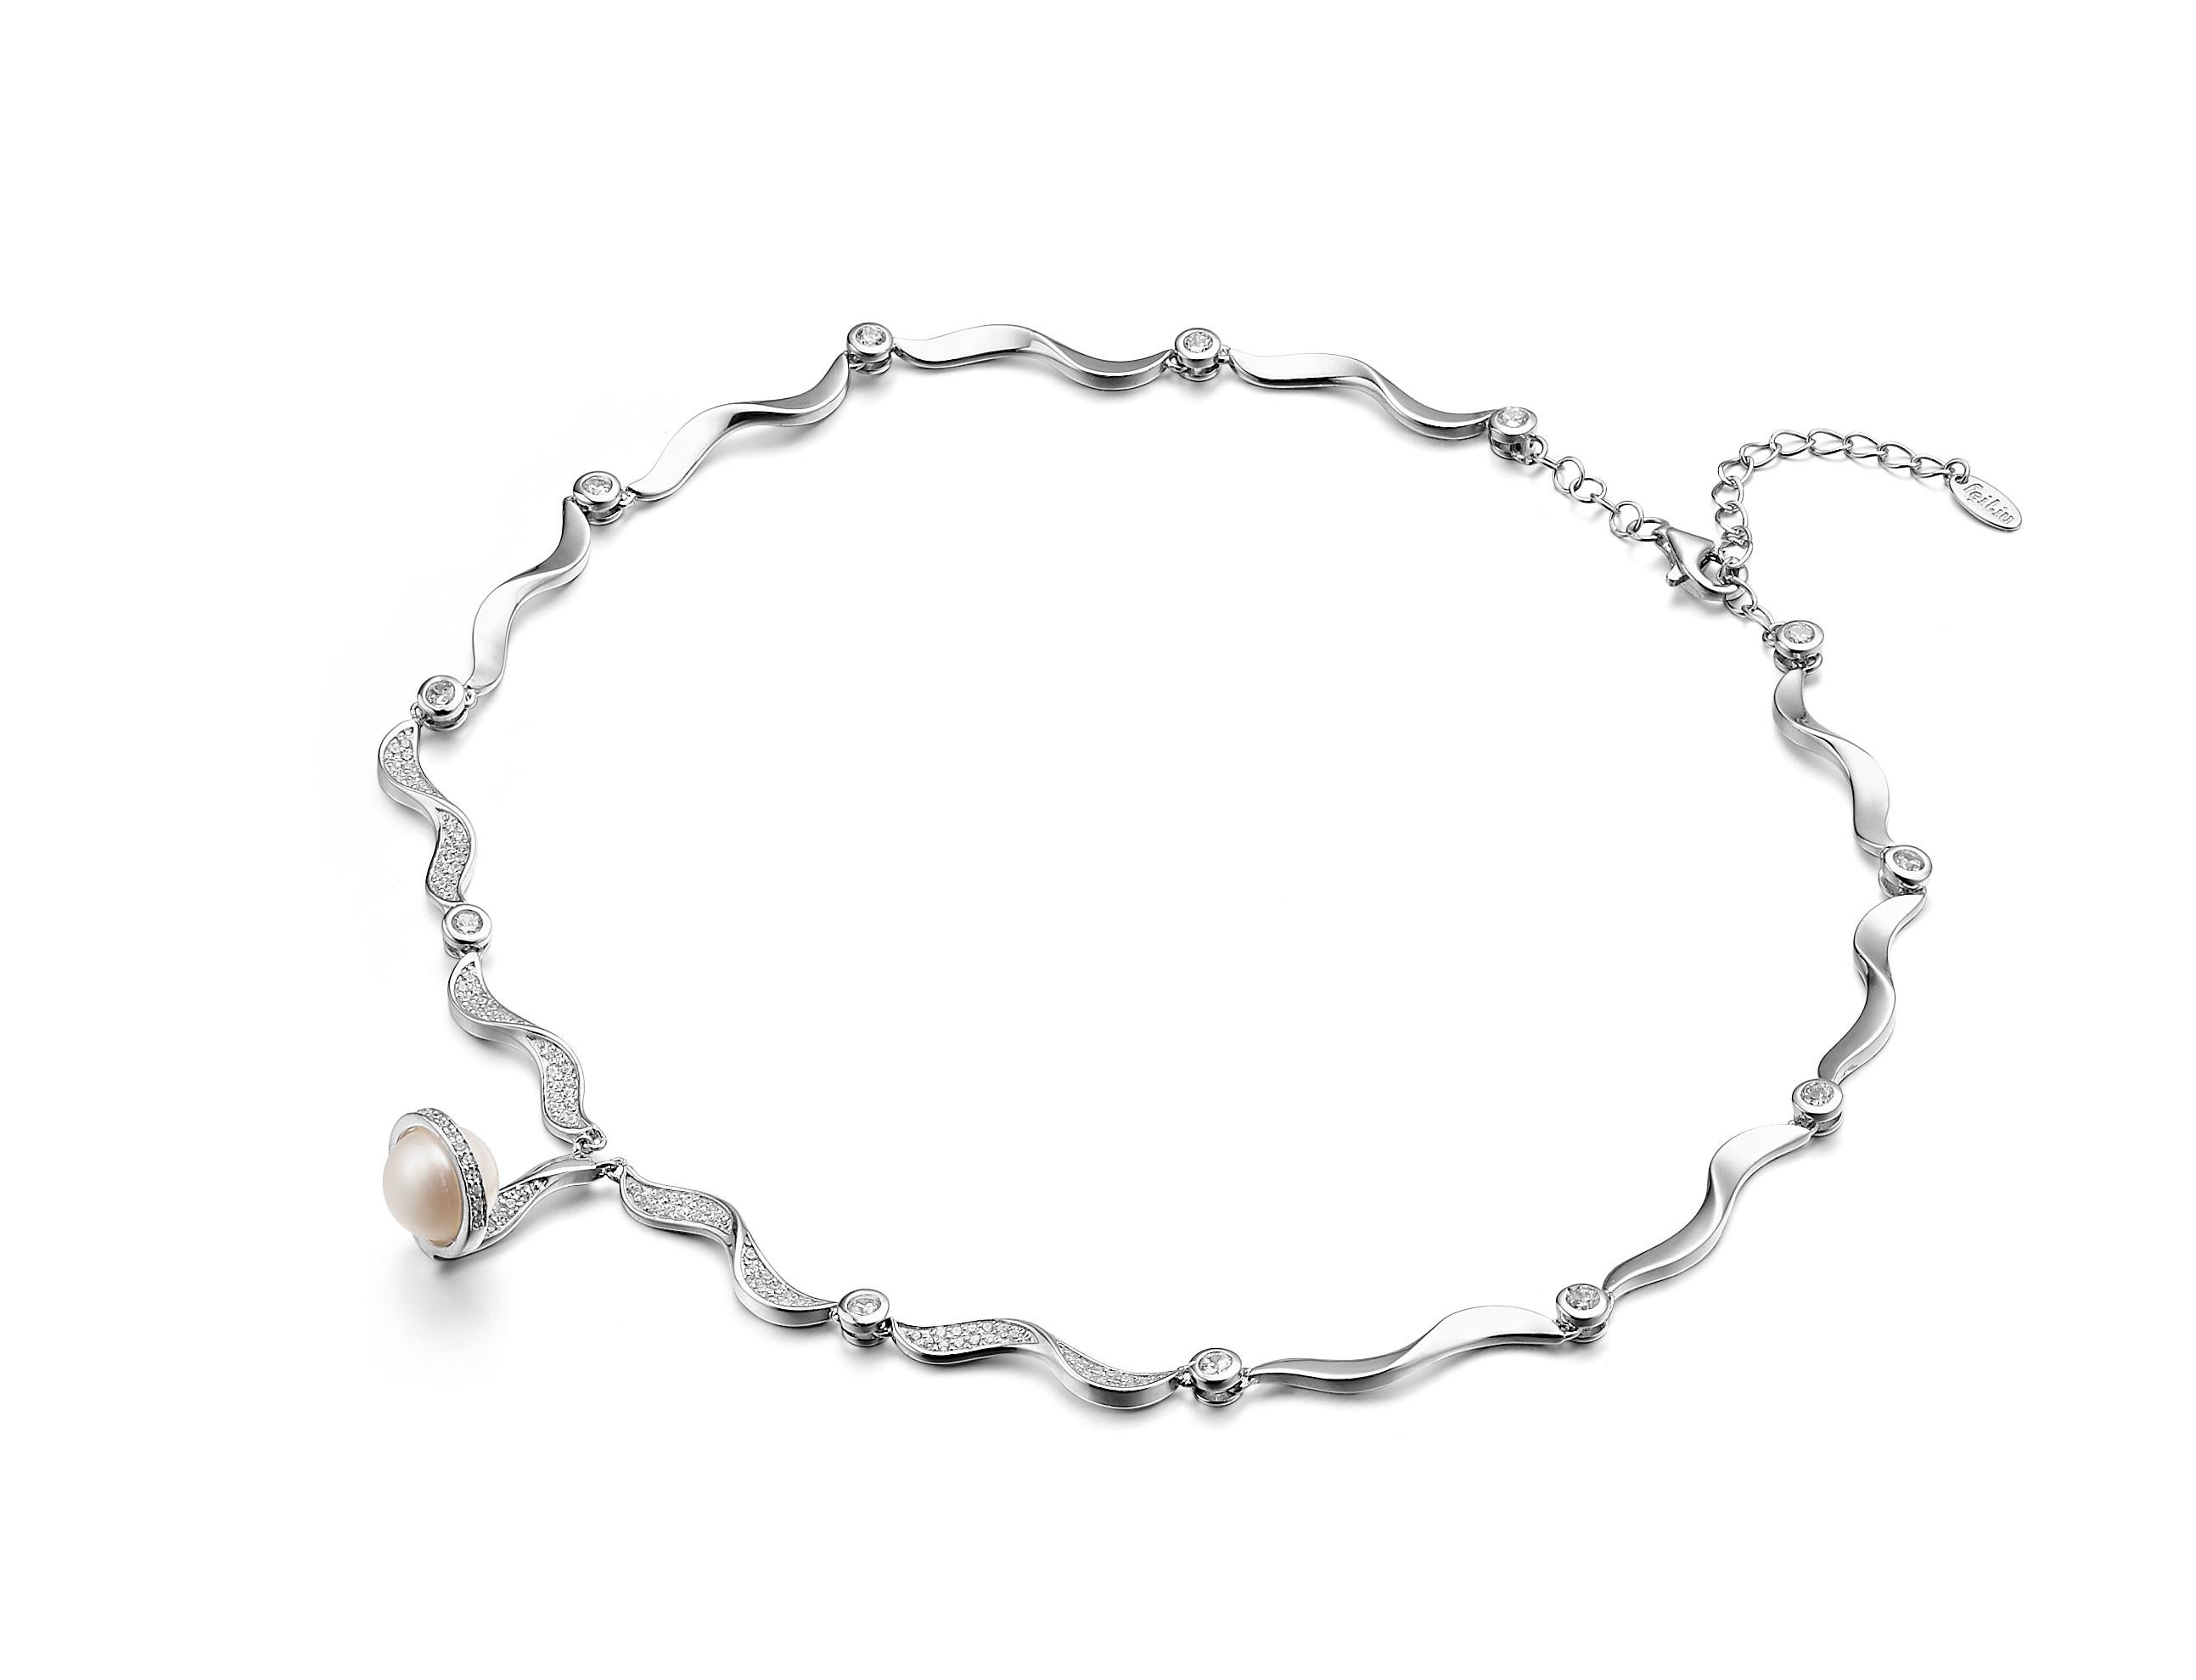 This Pirouette Collection emanates femininity and elegance. The dramatic bangle exdues sophisticationto let you shine. The lustrous pearl and woven ribbons of 8 hearts and 8 arrows cubic zirconia gives extra sparkle to the waves of sterling silver.